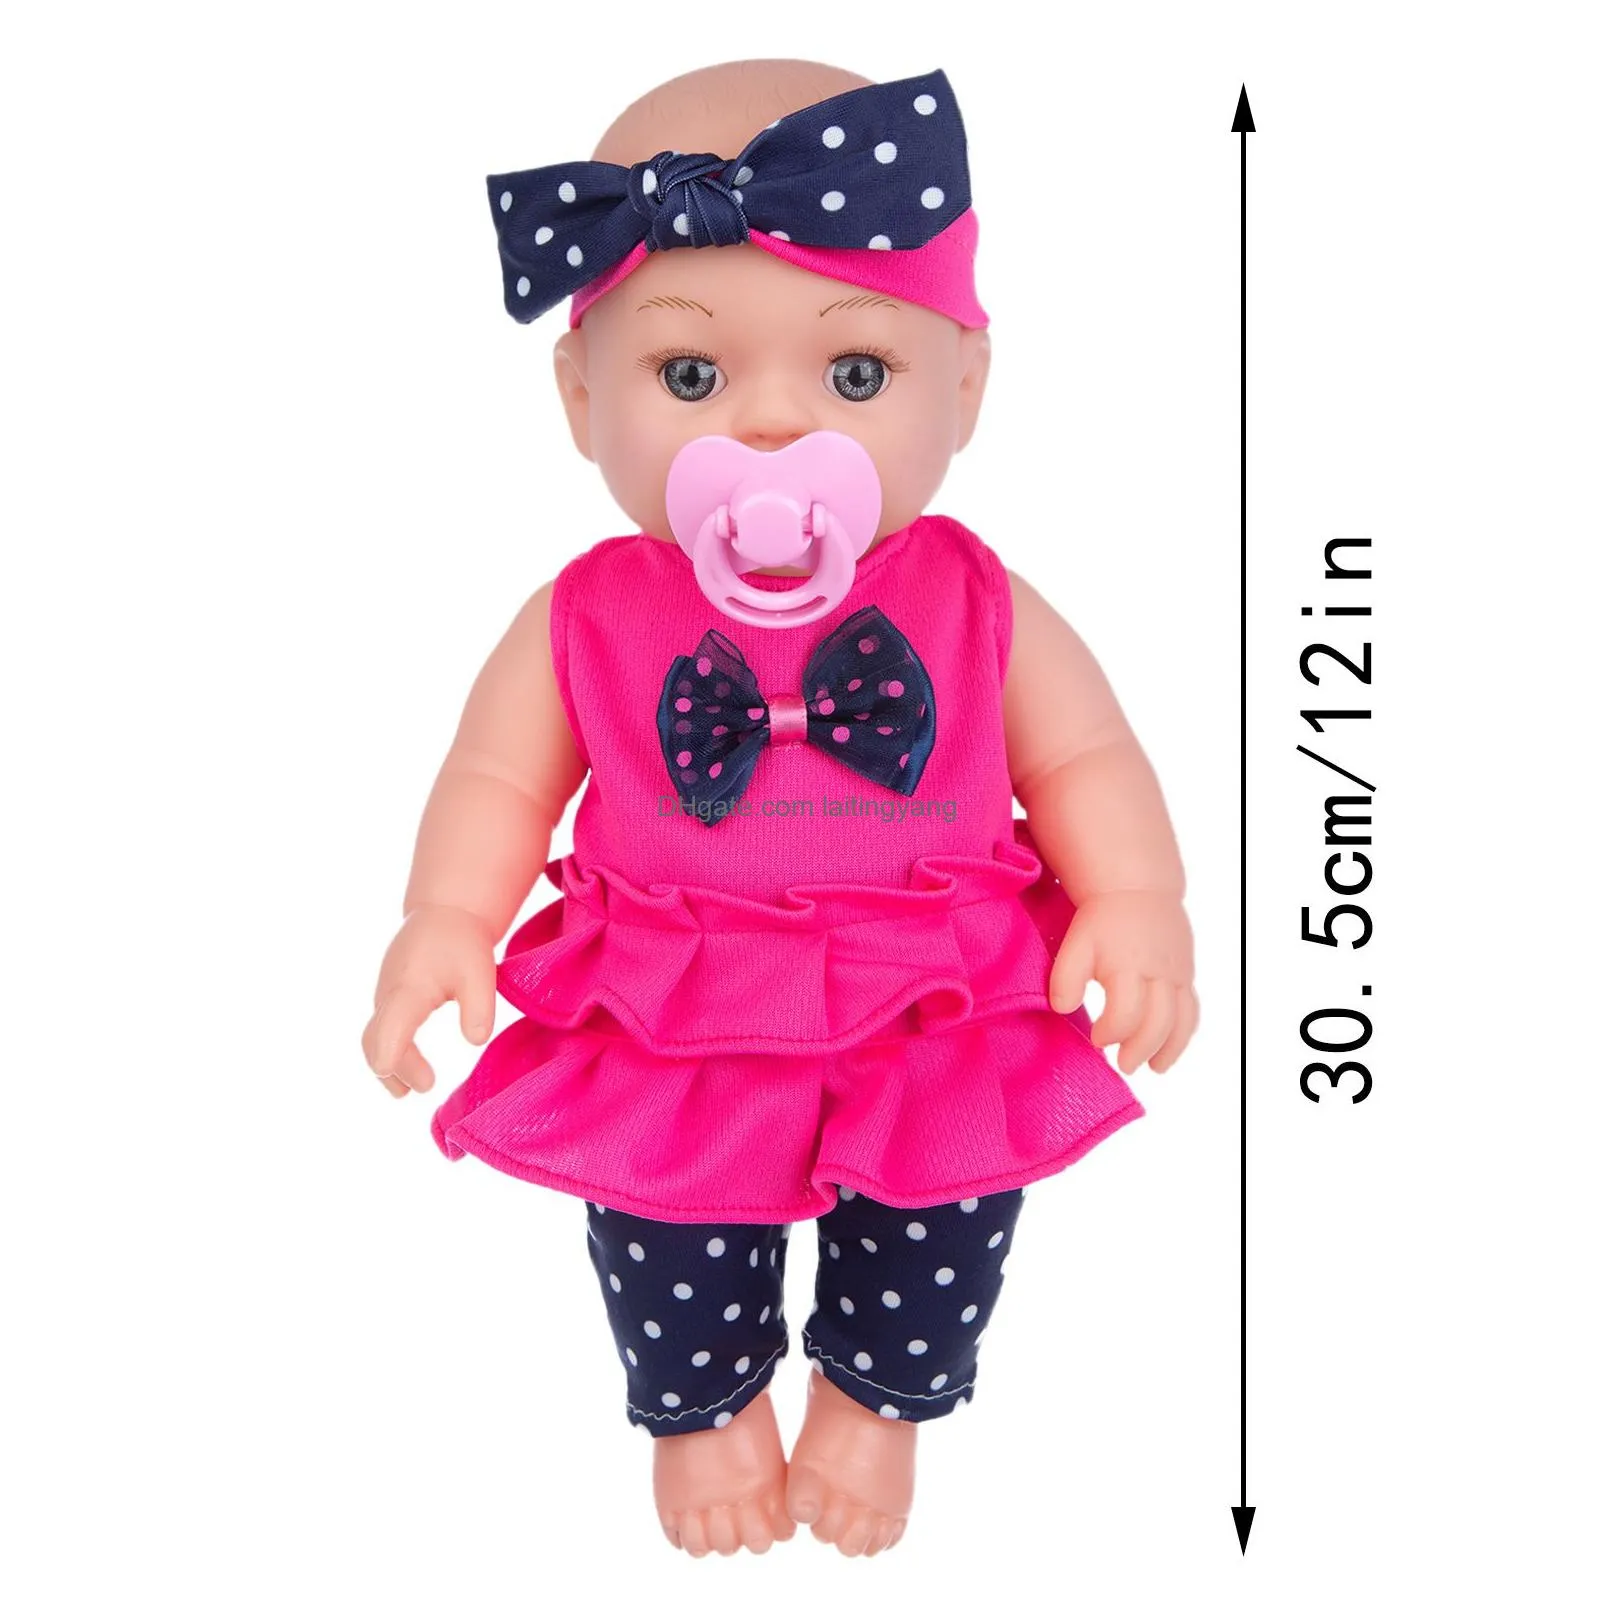 dolls 1 set simulated baby soft silicone body dressing cloth doll realistic born doll parenting toy for kids education toy 230426